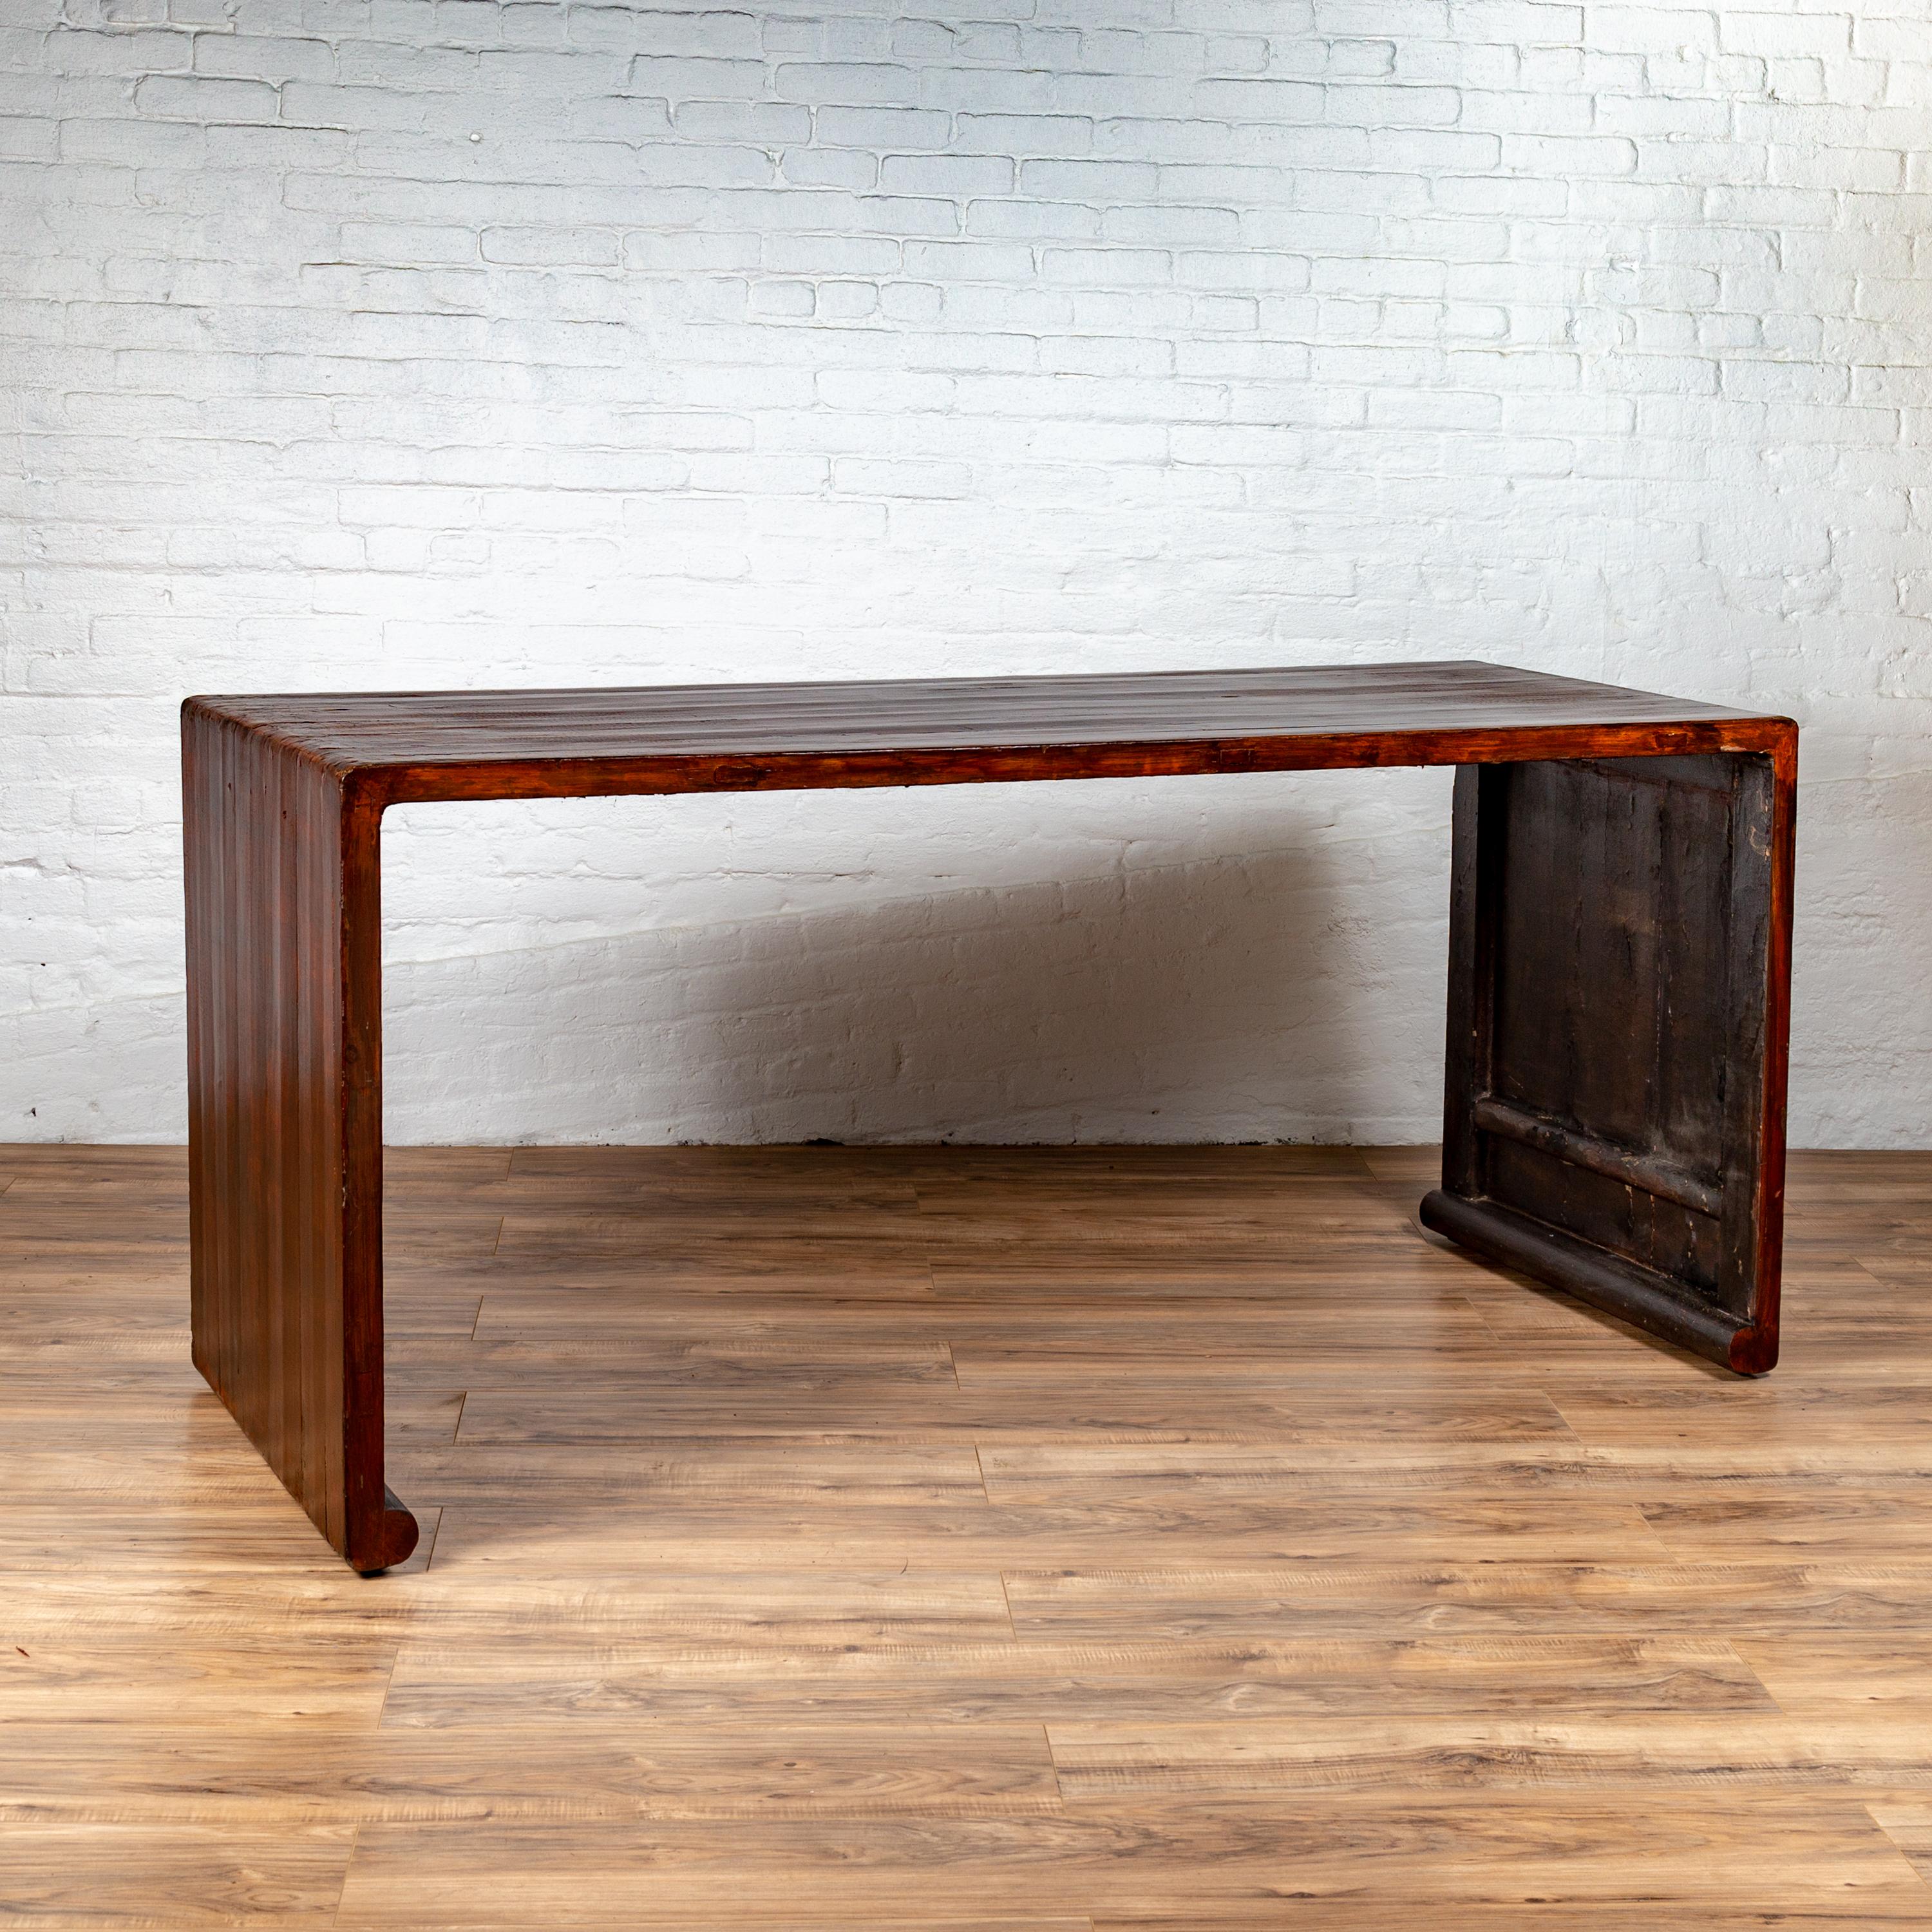 A vintage Burmese waterfall console table from the mid-20th century, with scrolling feet and dark patina. Born in Burma during the mid-century period, this elegant console table features a waterfall wooden frame with solid boards, boasting a lovely